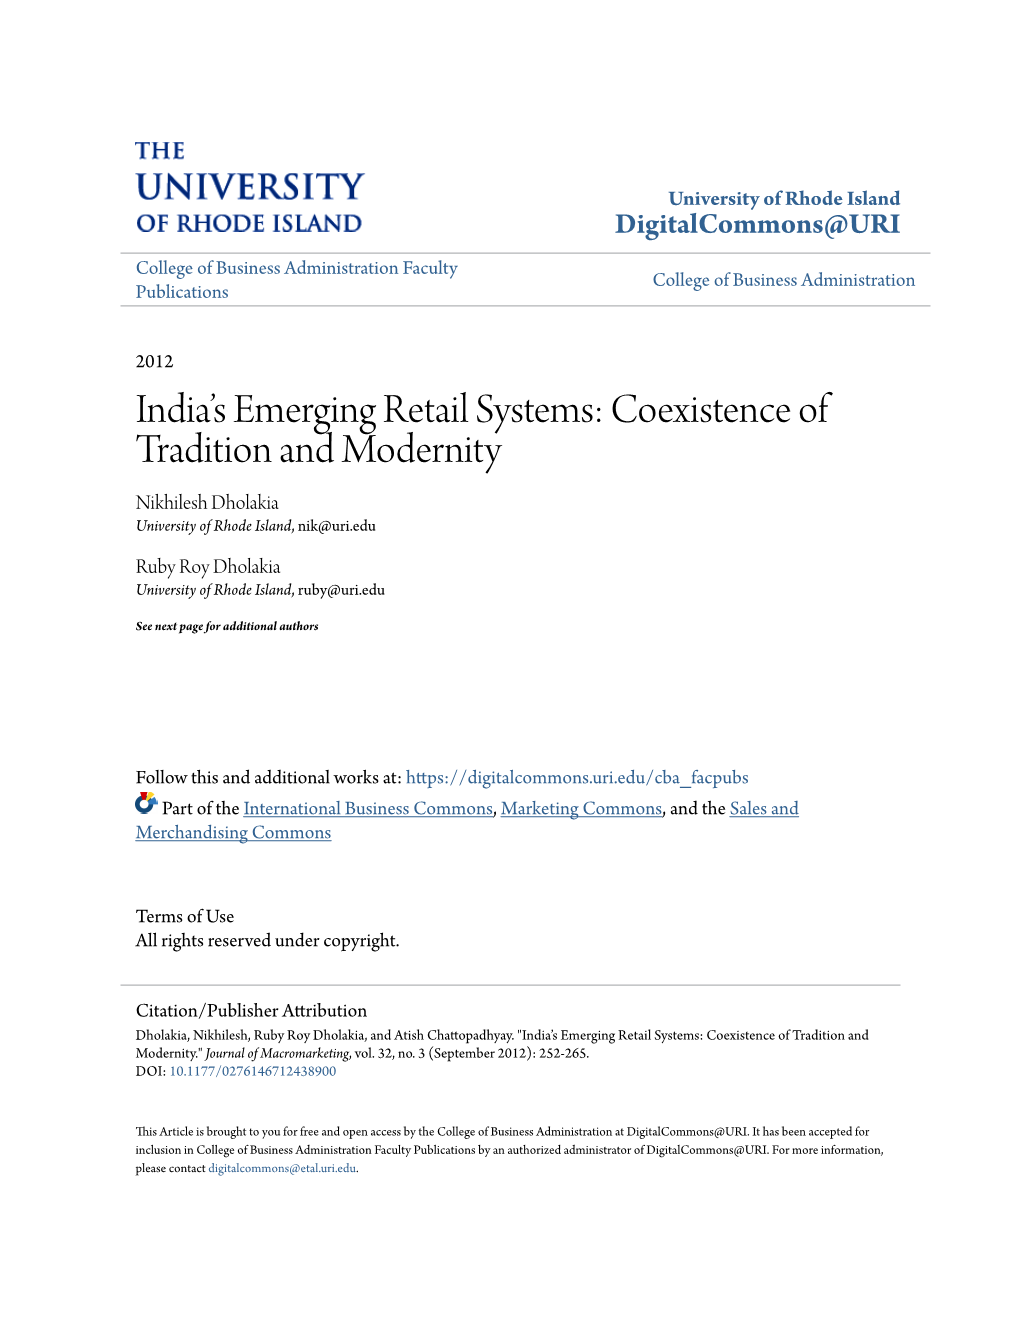 India's Emerging Retail Systems: Coexistence of Tradition And